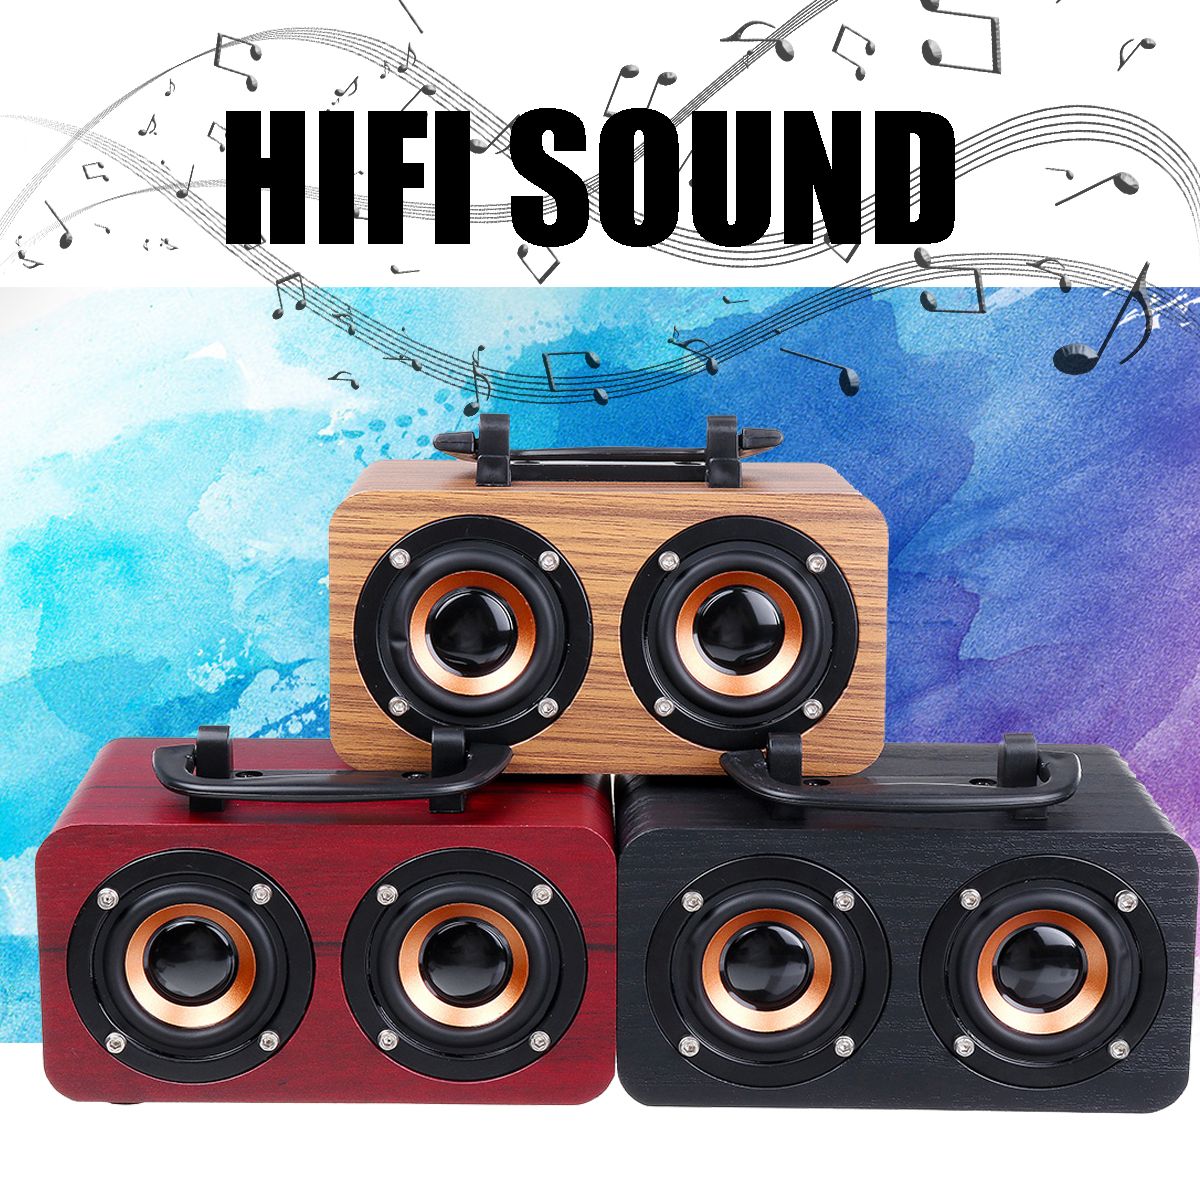 FT-4002-Wooden-Wireless-bluetooth-Speaker-Dual-Driver-TF-Card-Stereo-Bass-Subwoofer-with-Mic-with-Ph-1591054